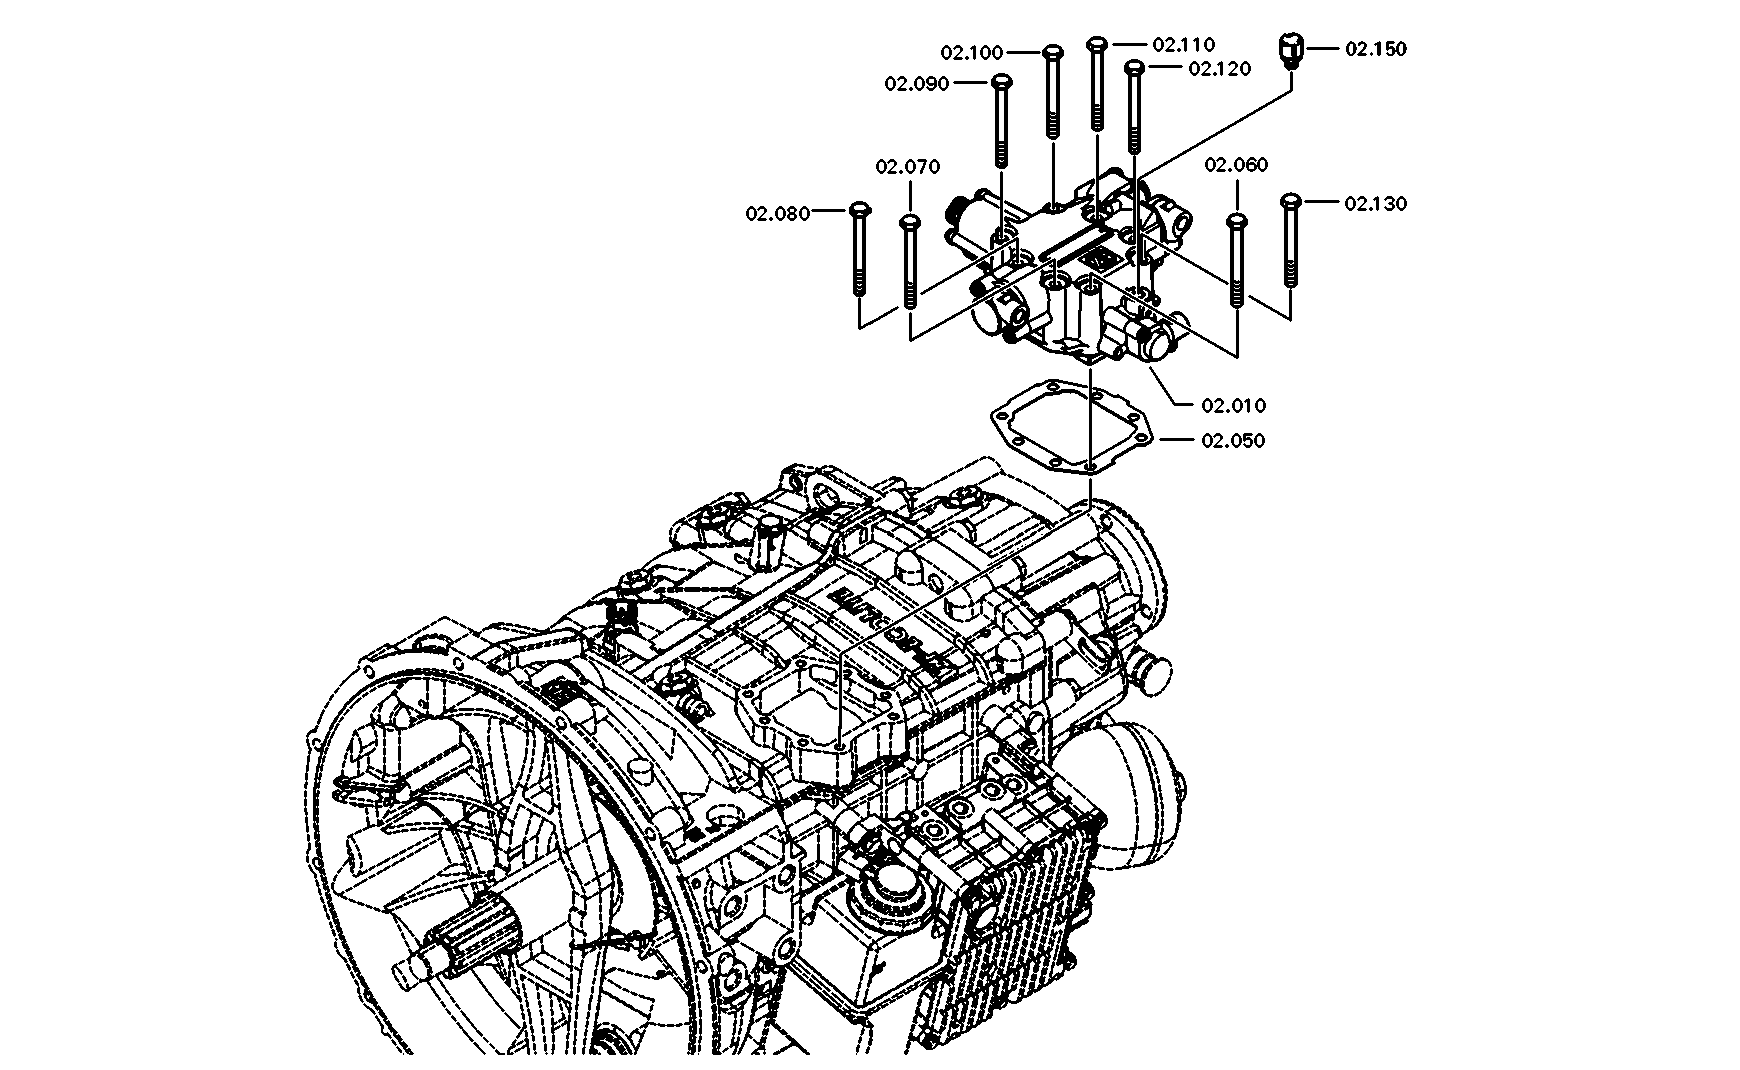 drawing for DAF 1821349 - TRANSMISSION ACTUATOR (figure 4)